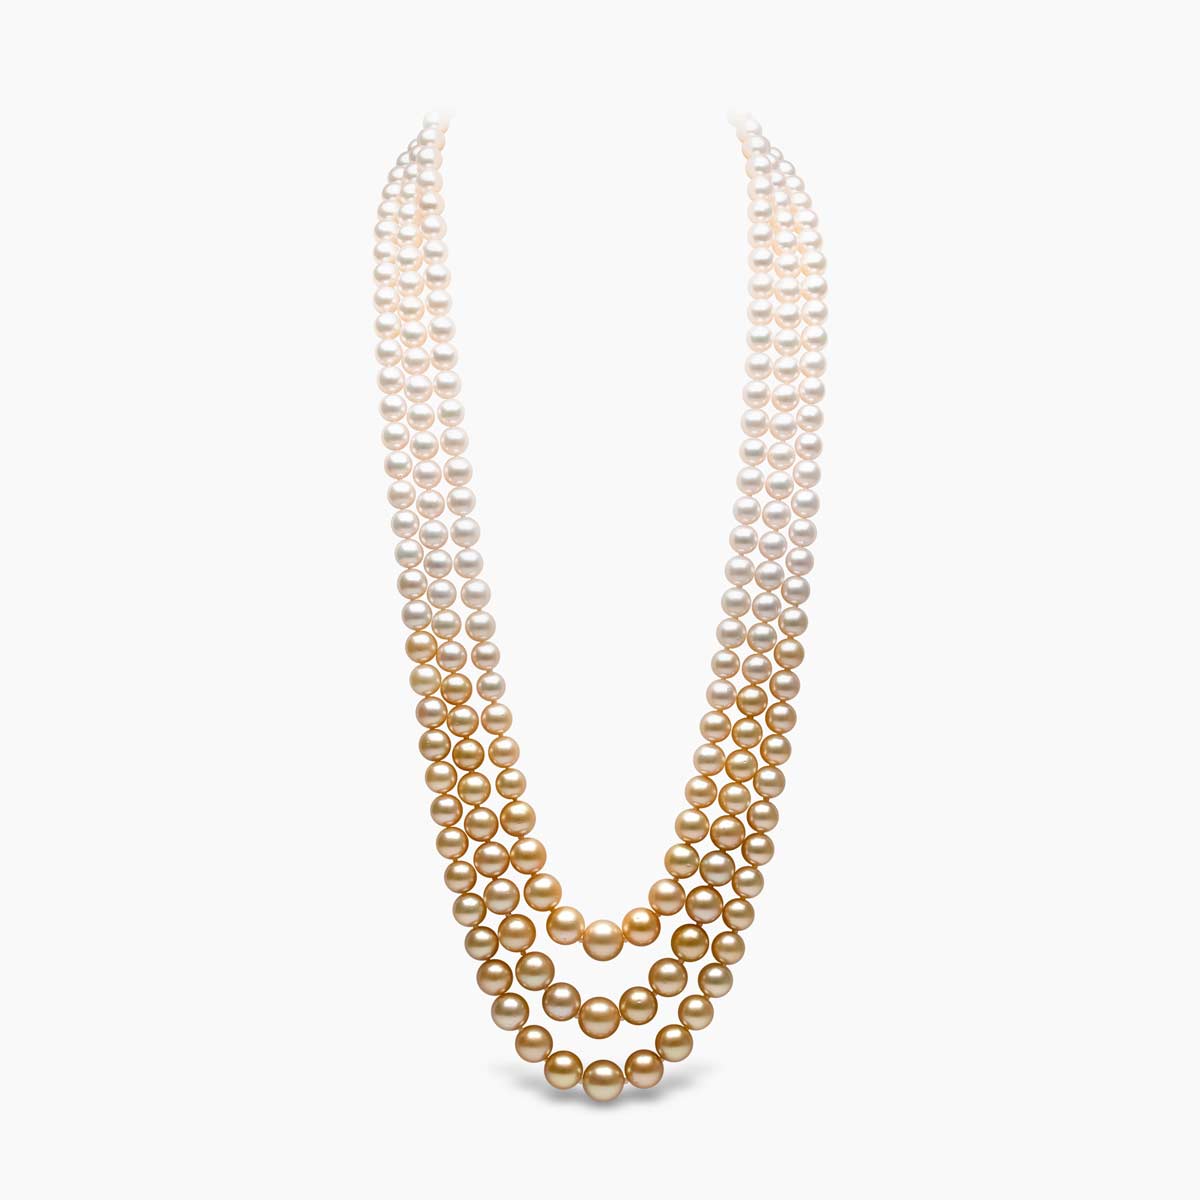 Ombré 18K Golden South Sea and Akoya Pearl Necklace